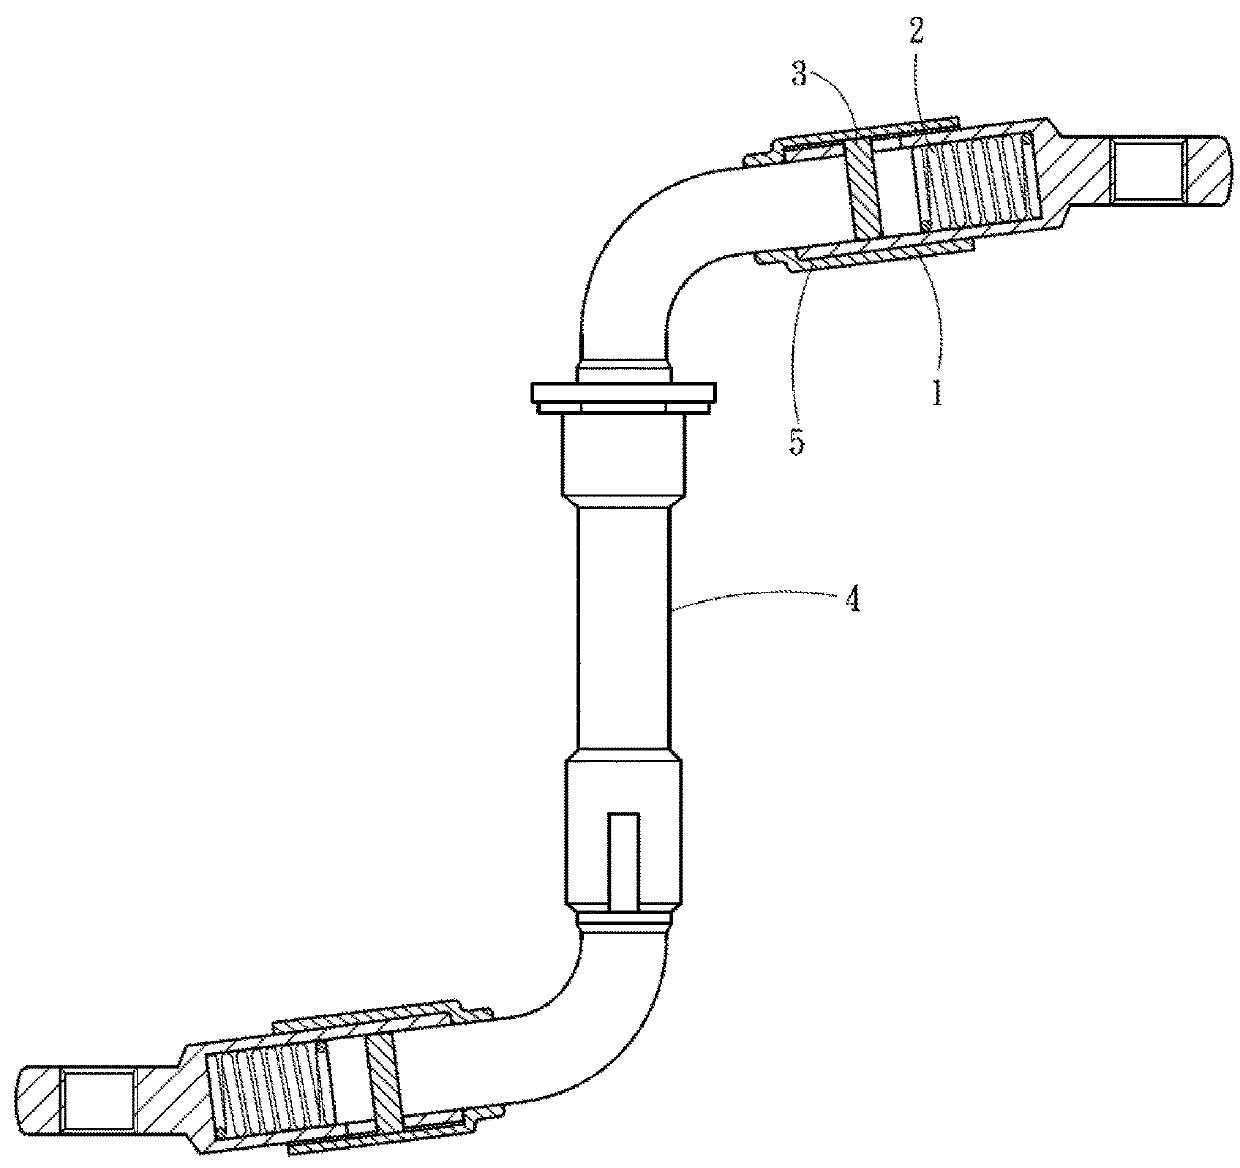 Collapsible connected crank having internal pressure springs